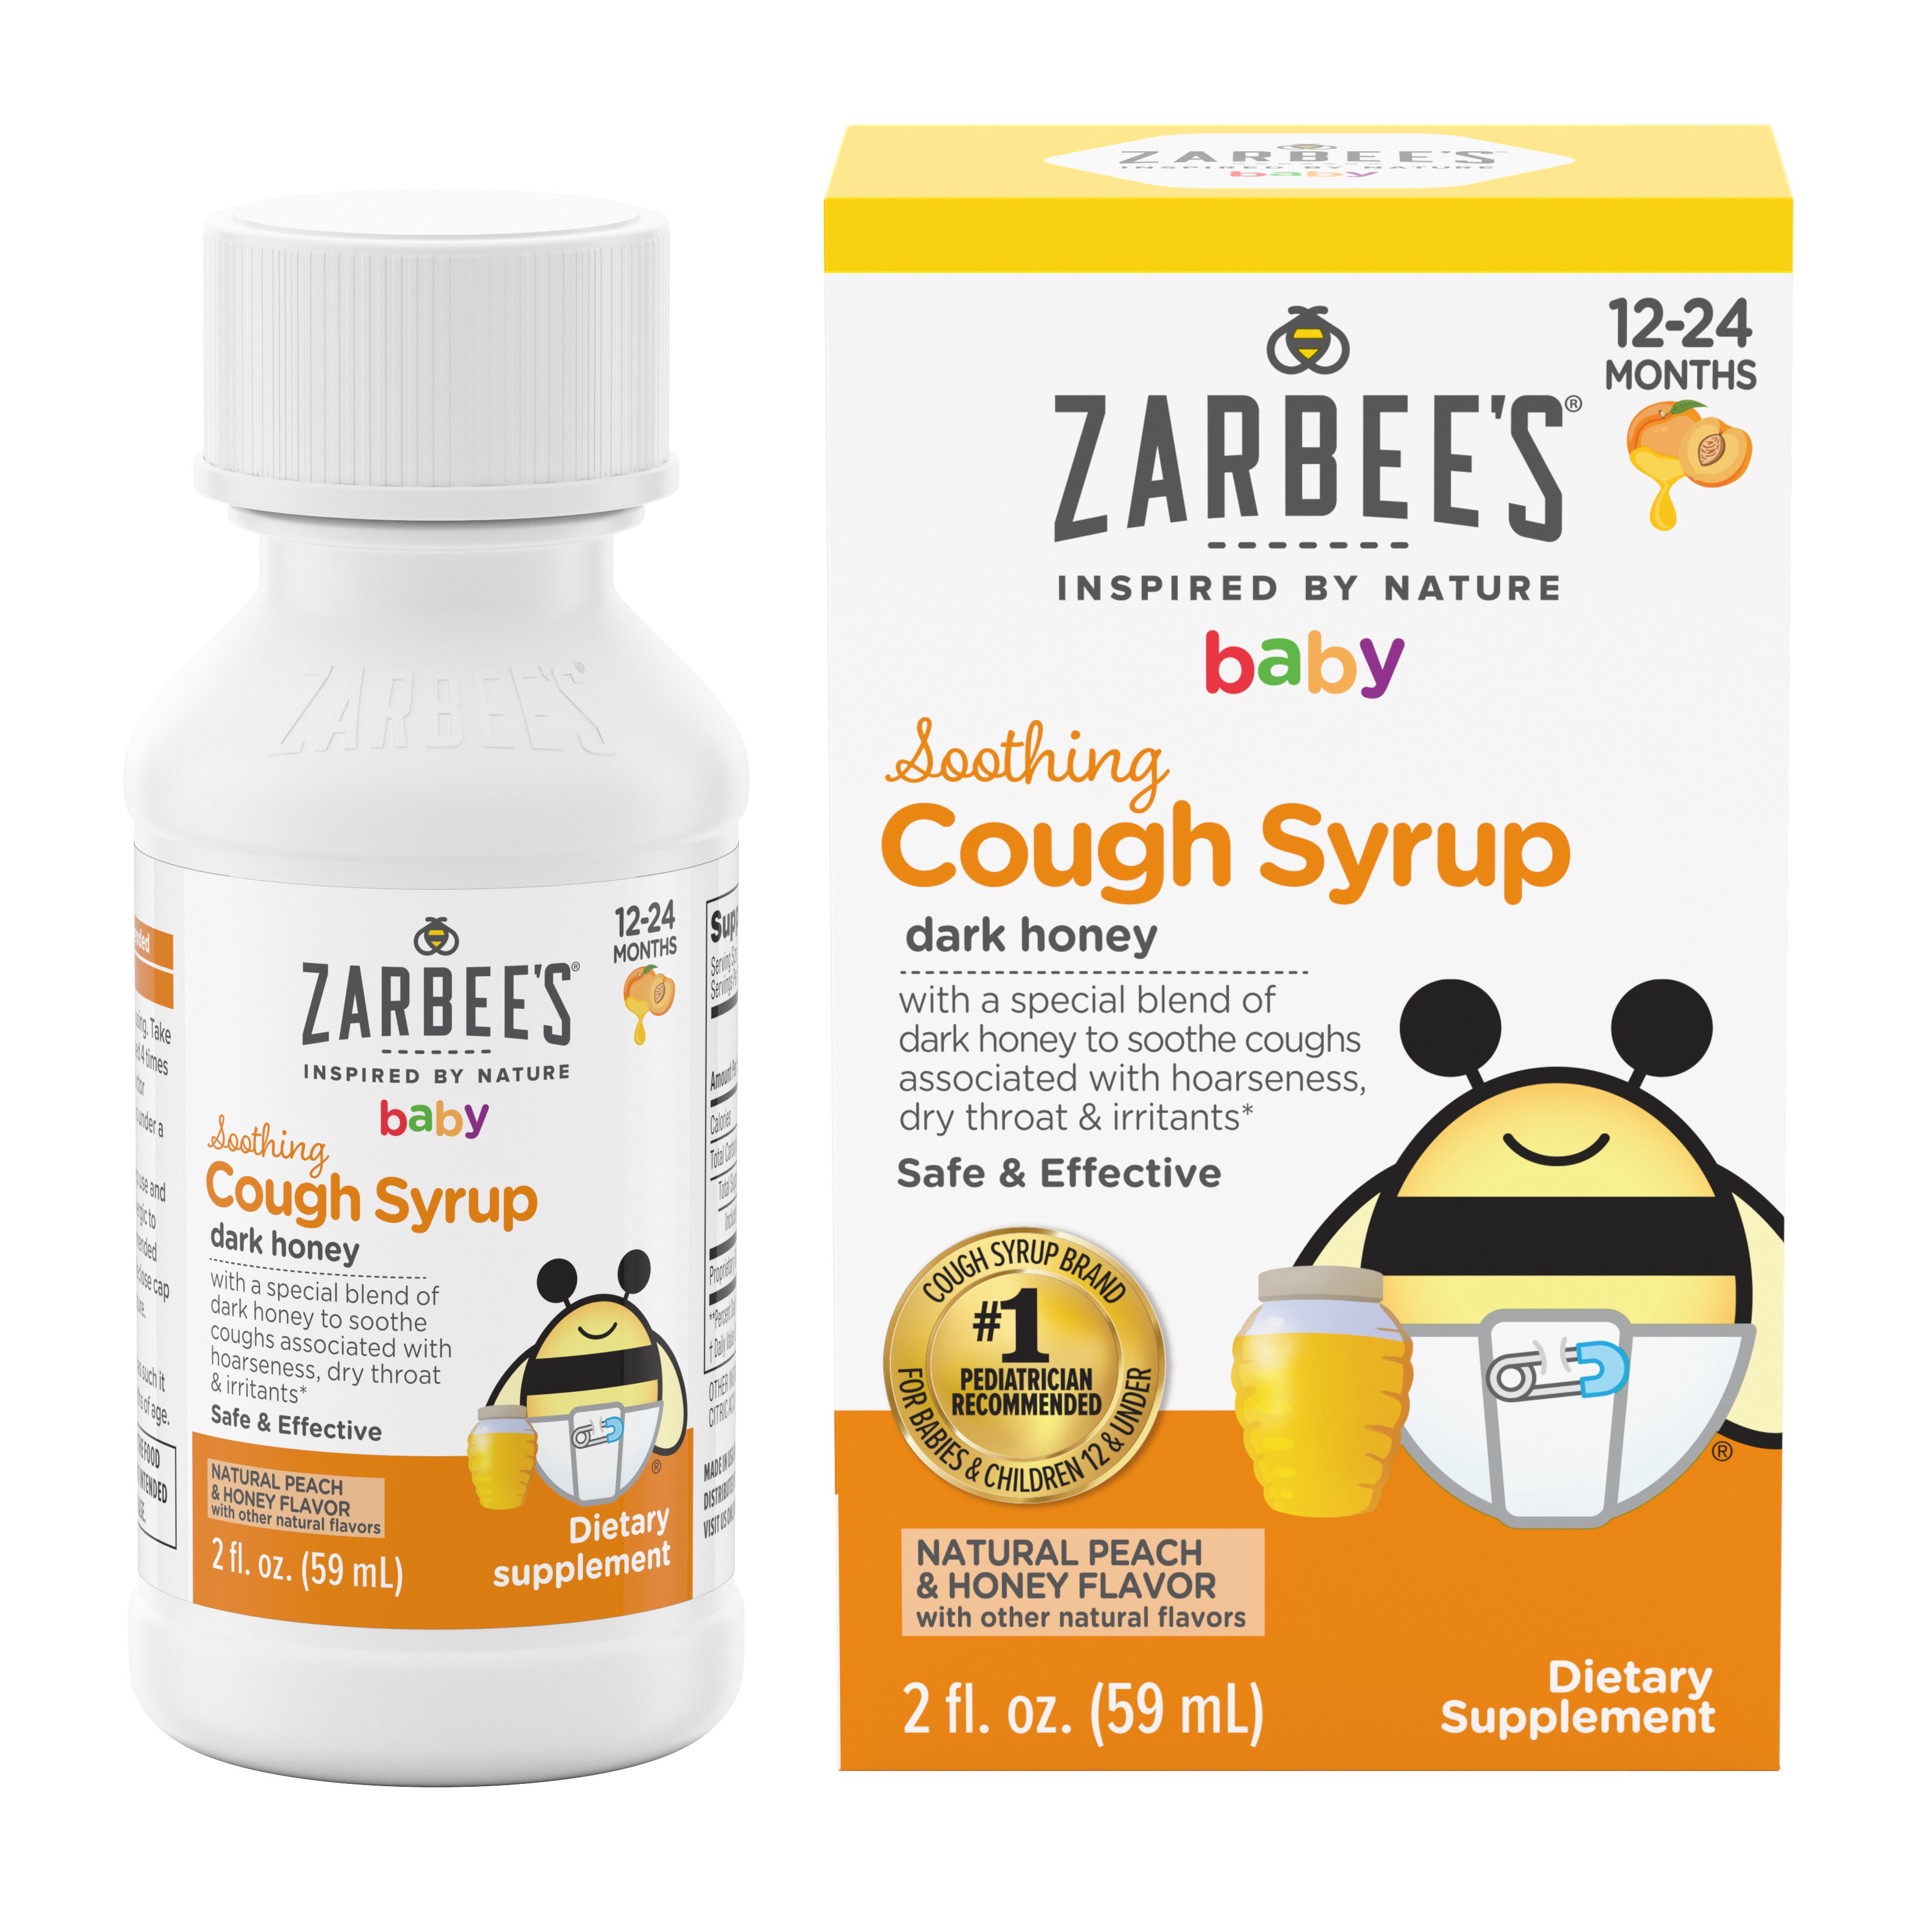 slide 4 of 5, Zarbee's Naturals Soothing Baby Cough Syrup, Drug & Alcohol-Free Toddler Cough Relief with Dark Honey, Natural Peach and Honey Flavor, 2 Fl Oz, 2 fl oz